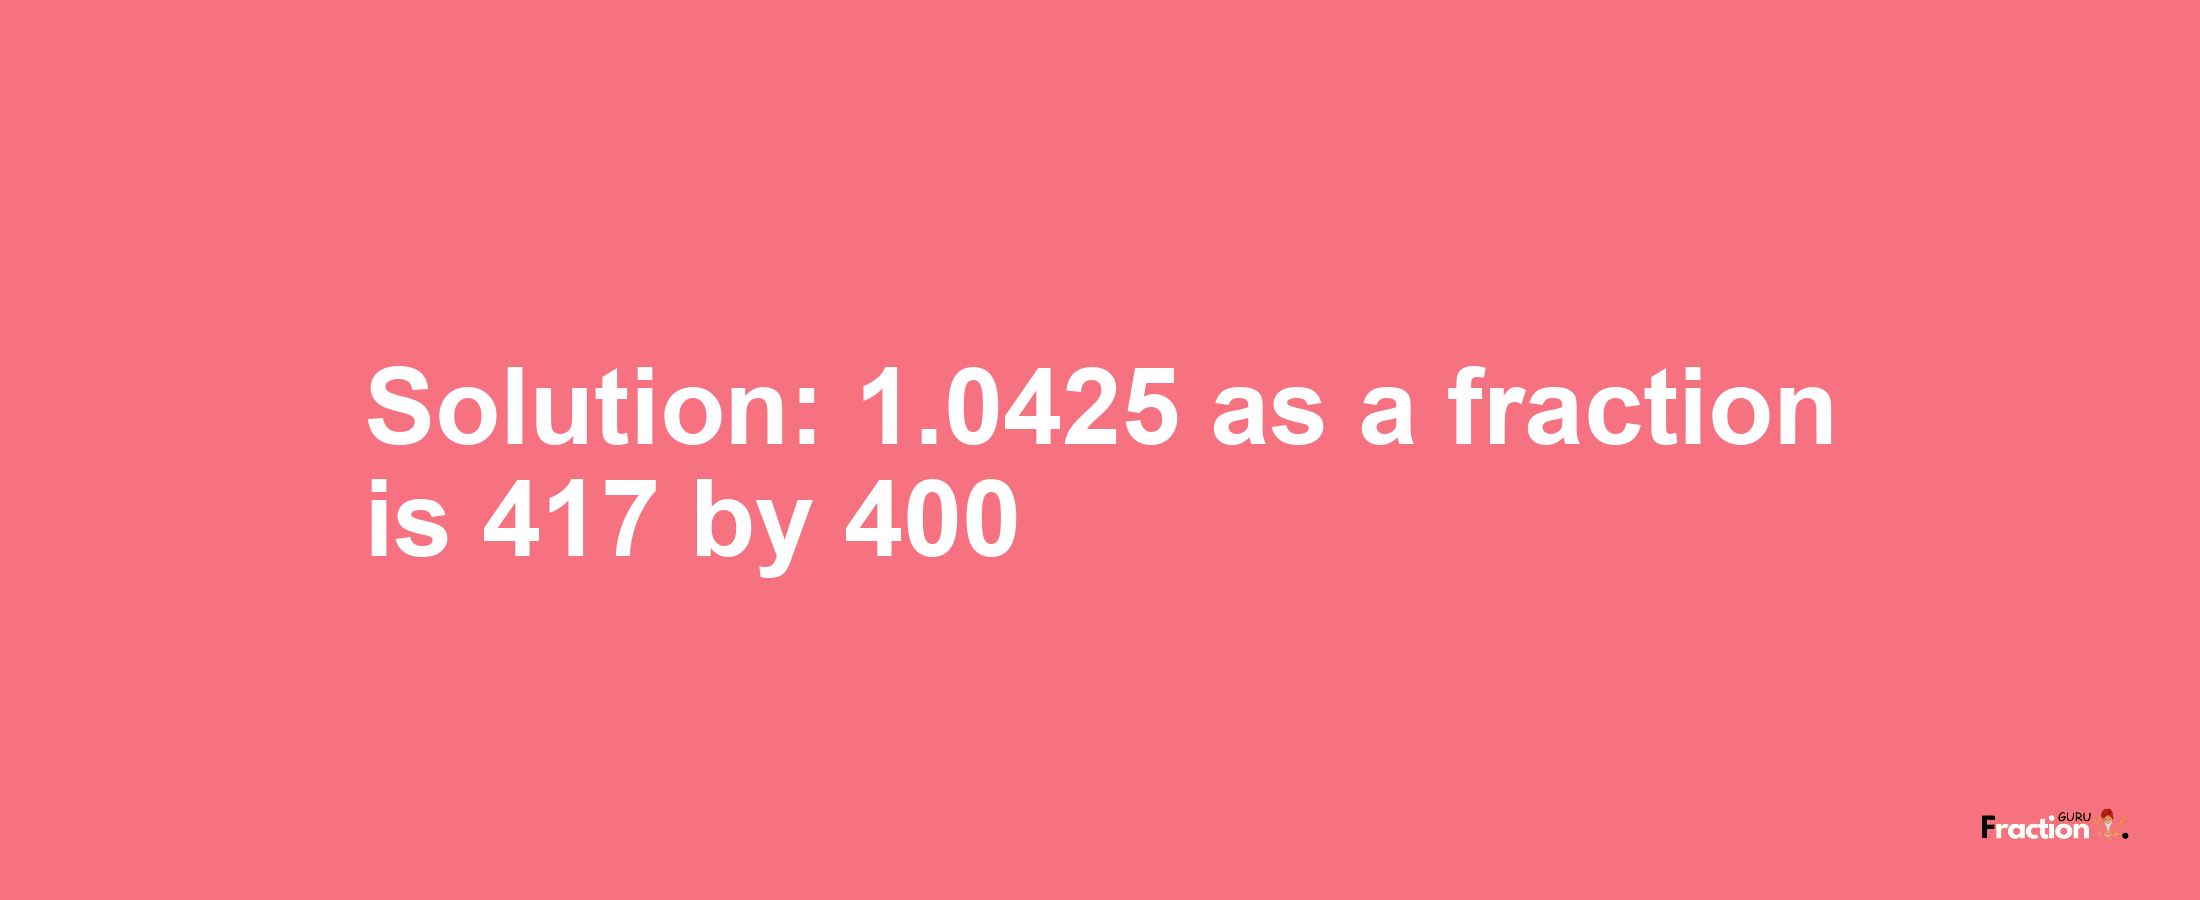 Solution:1.0425 as a fraction is 417/400